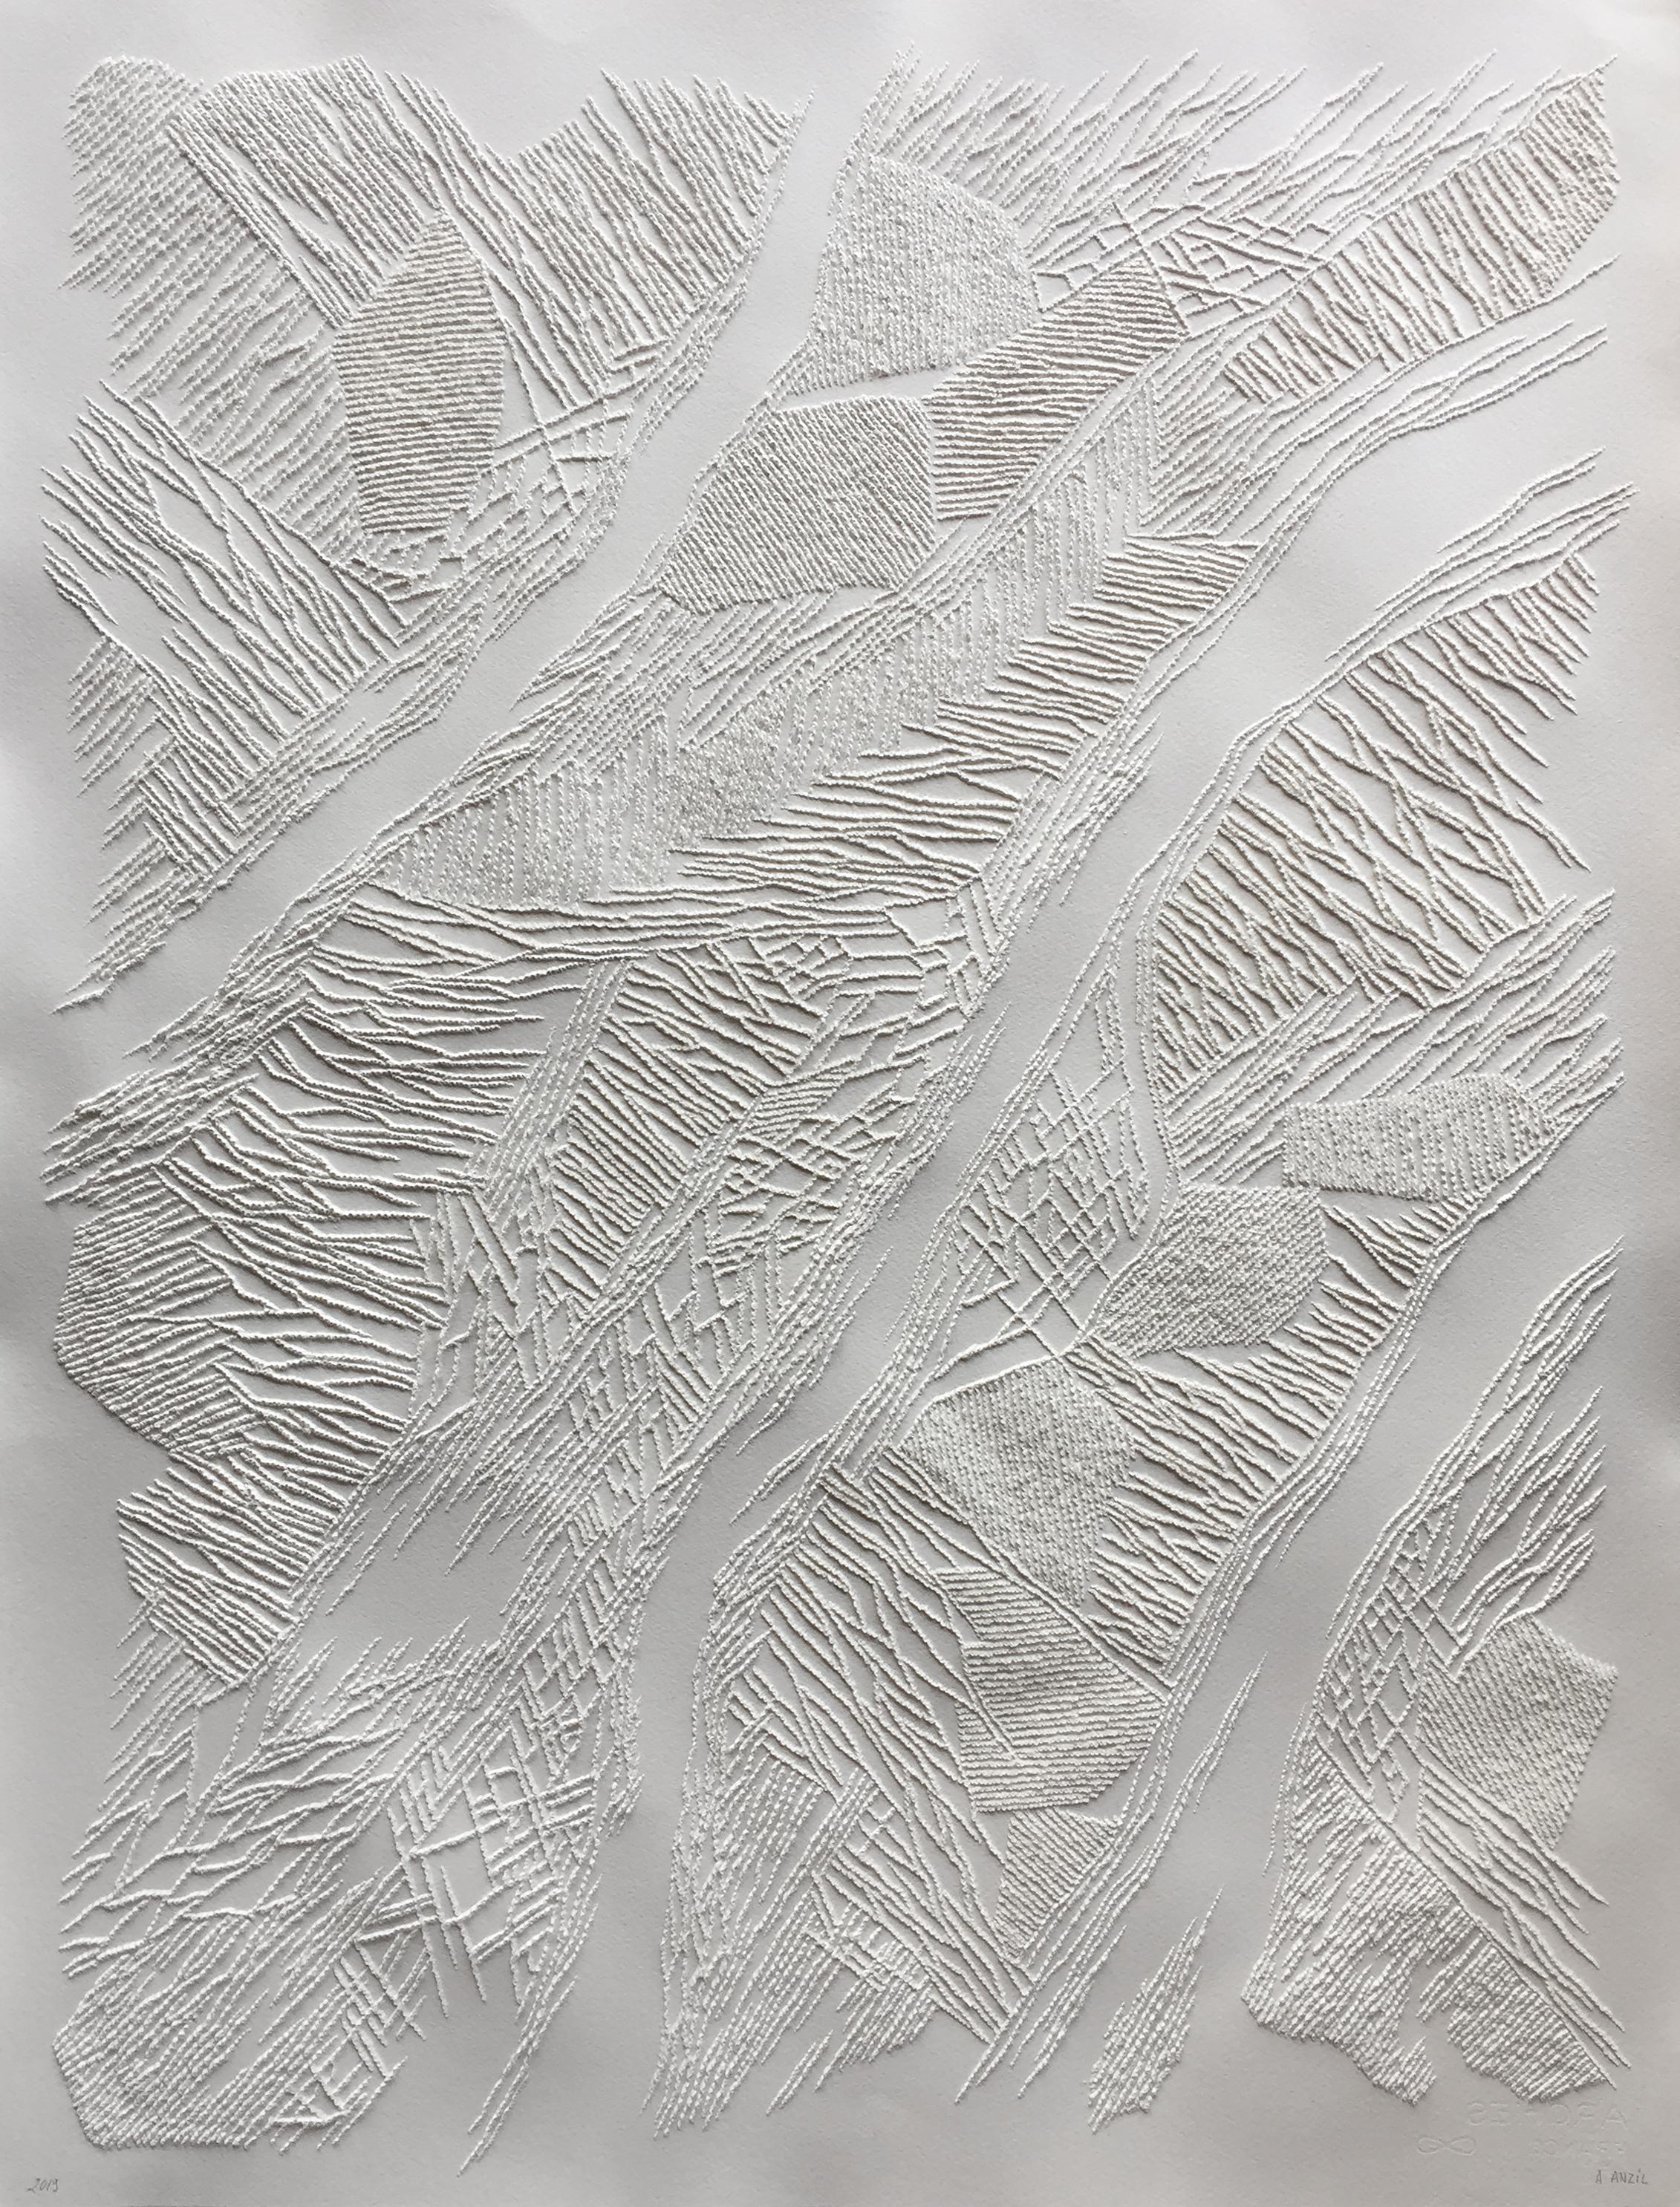 Antonin Anzil Abstract Drawing - Untitled 3 - intricate white 3D abstract geometric drypoint drawing on paper 